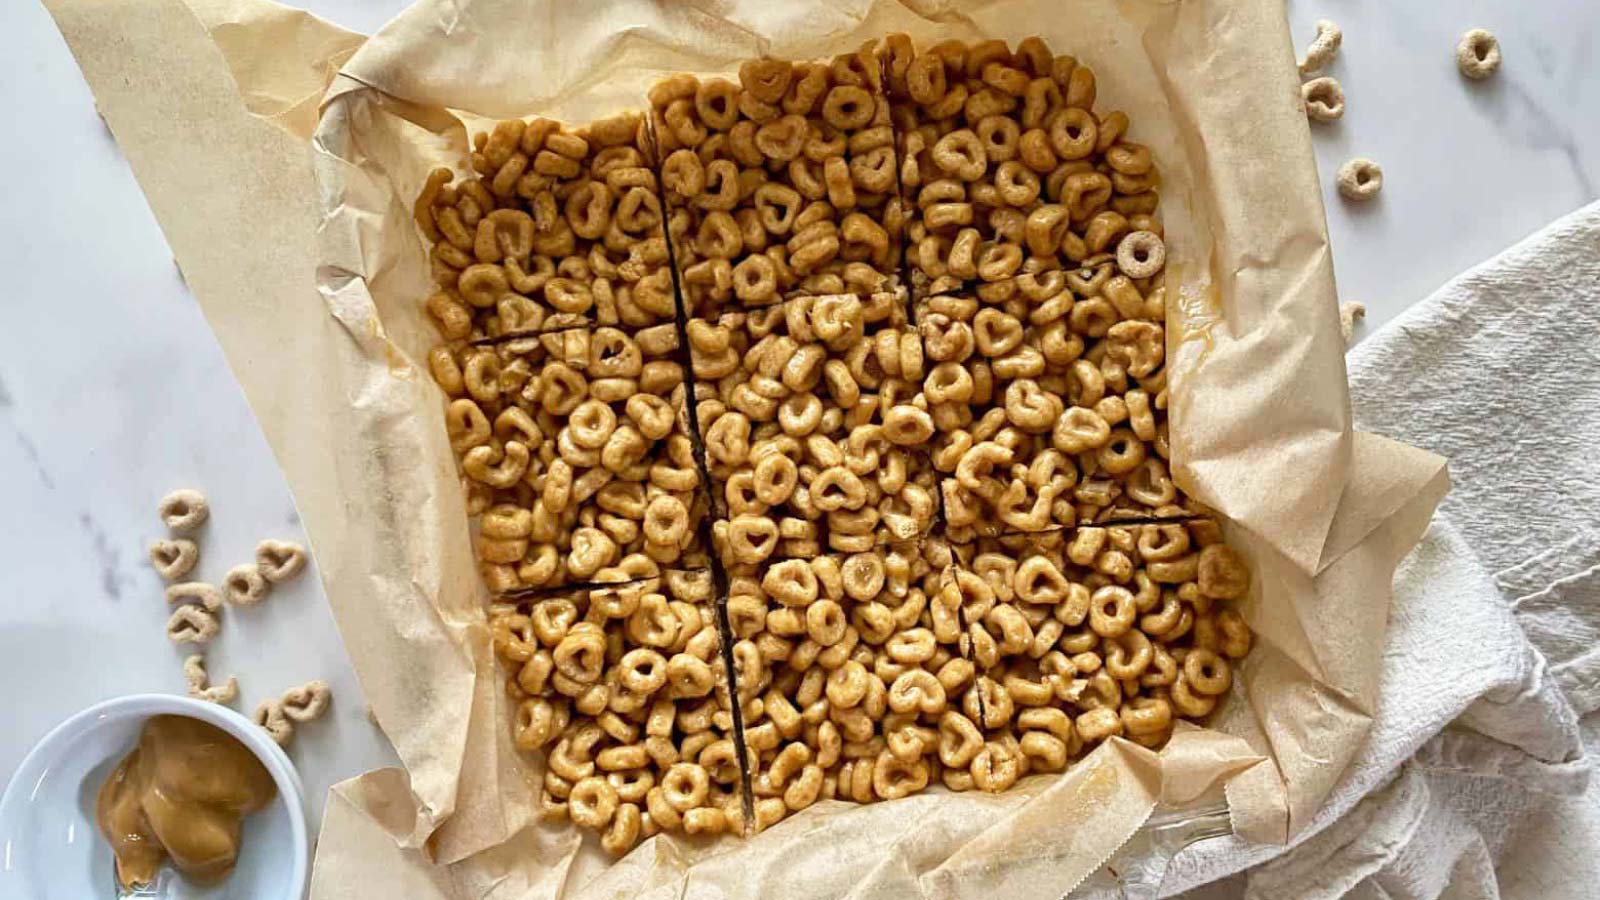 <p>There’s no need to turn on the oven for these tasty <a href="https://healthymomhealthyfamily.com/peanut-butter-cheerio-bars/" rel="external noopener noreferrer" title=" External link. Opens in a new tab.">peanut butter Cheerio bars</a> that the whole family is going to love. Perfect for snacking, a quick breakfast, or a tasty road trip snack, these four-ingredient snack bars are sure to become a household staple. </p>